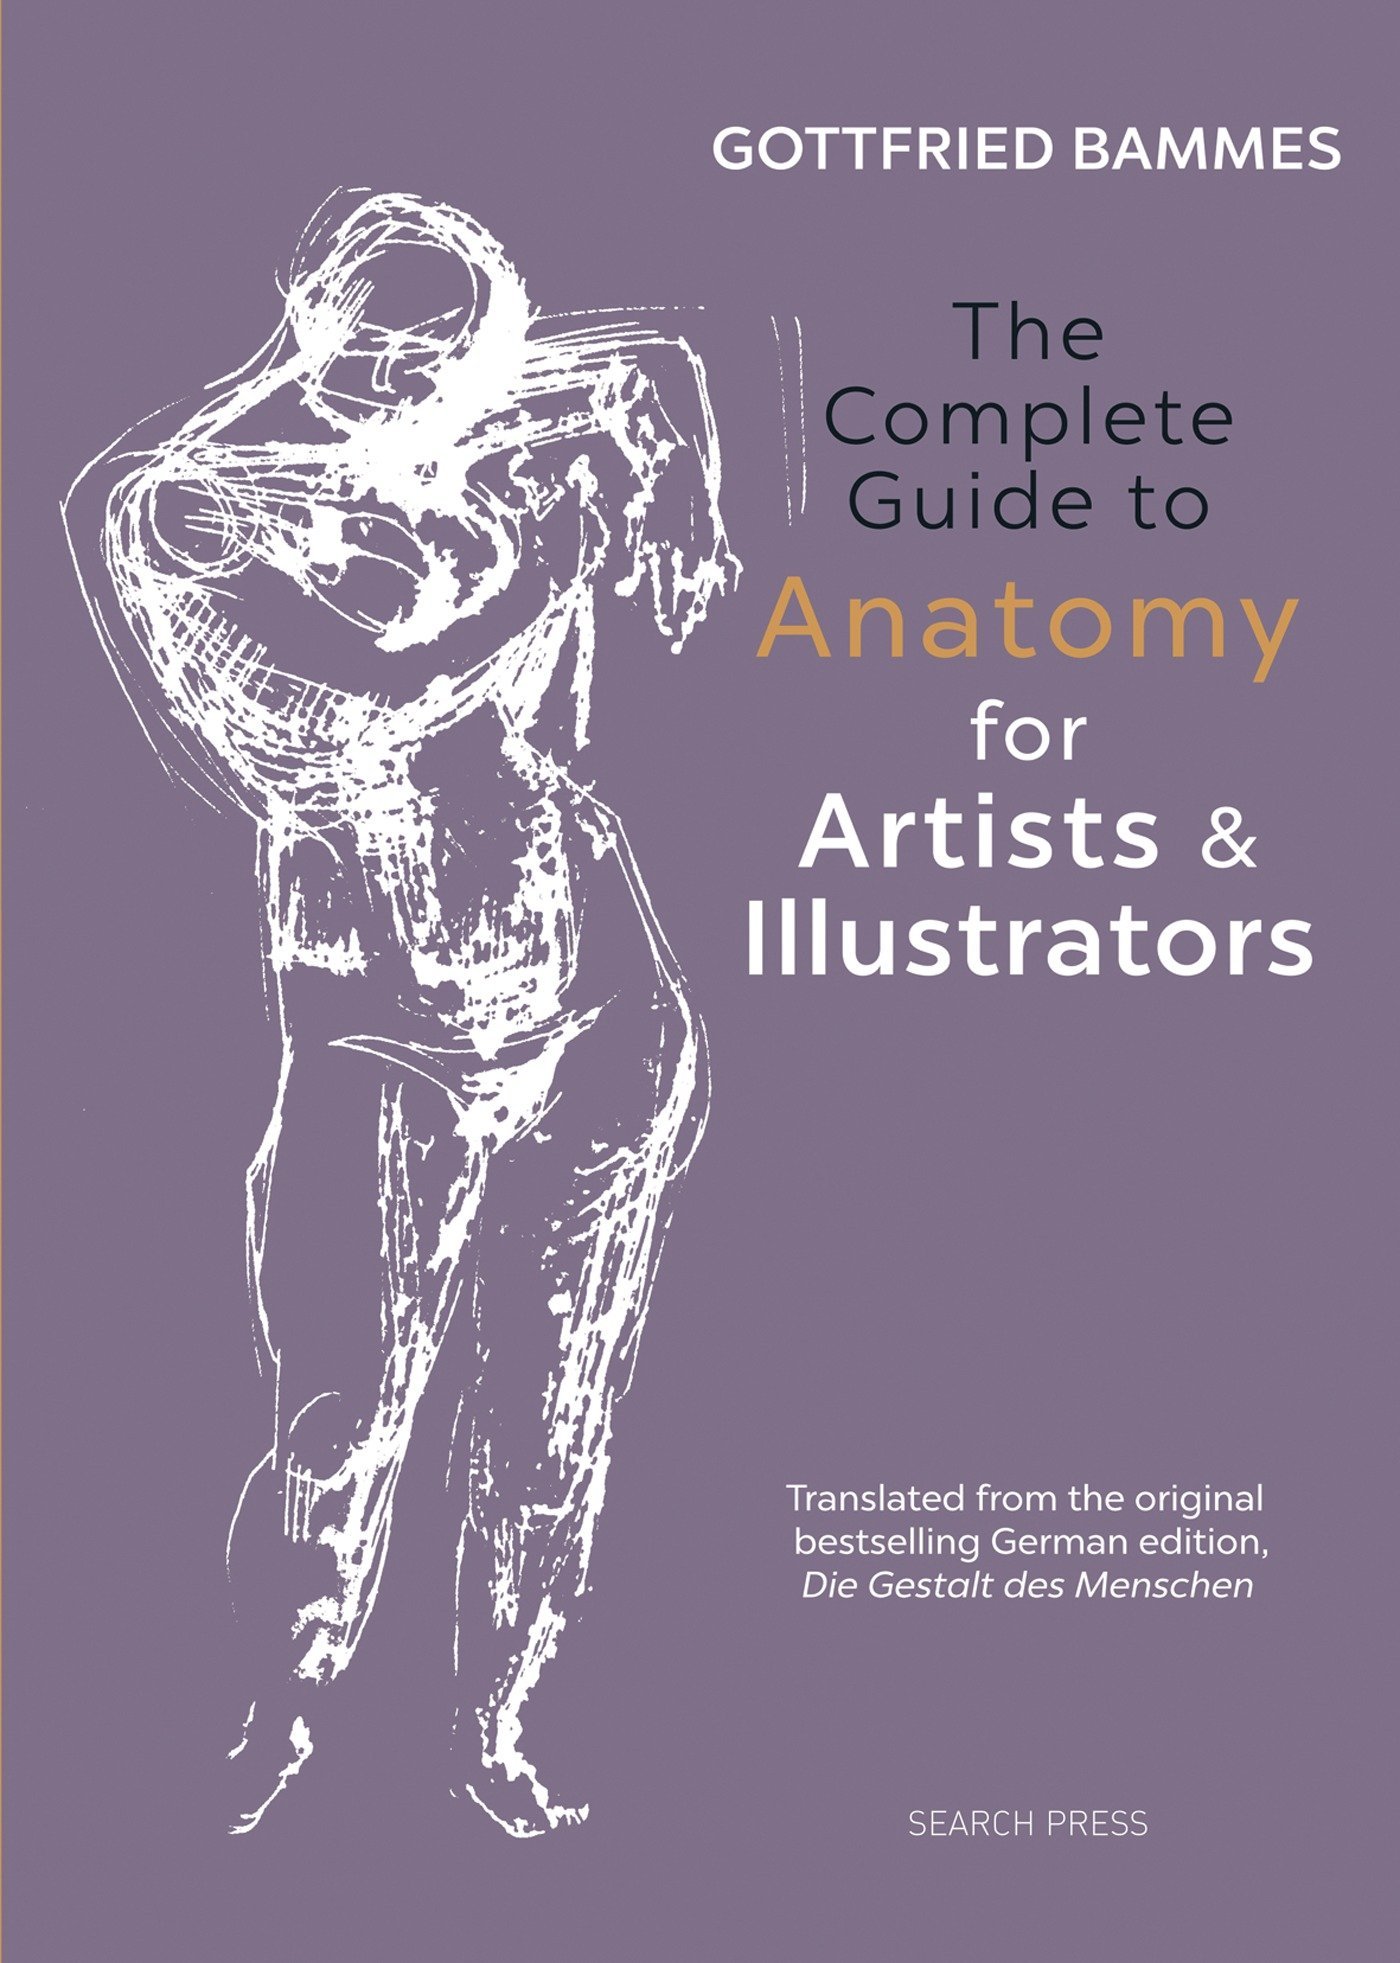 The Complete Guide to Anatomy for Artists & Illustrators | Gottfried Bammes